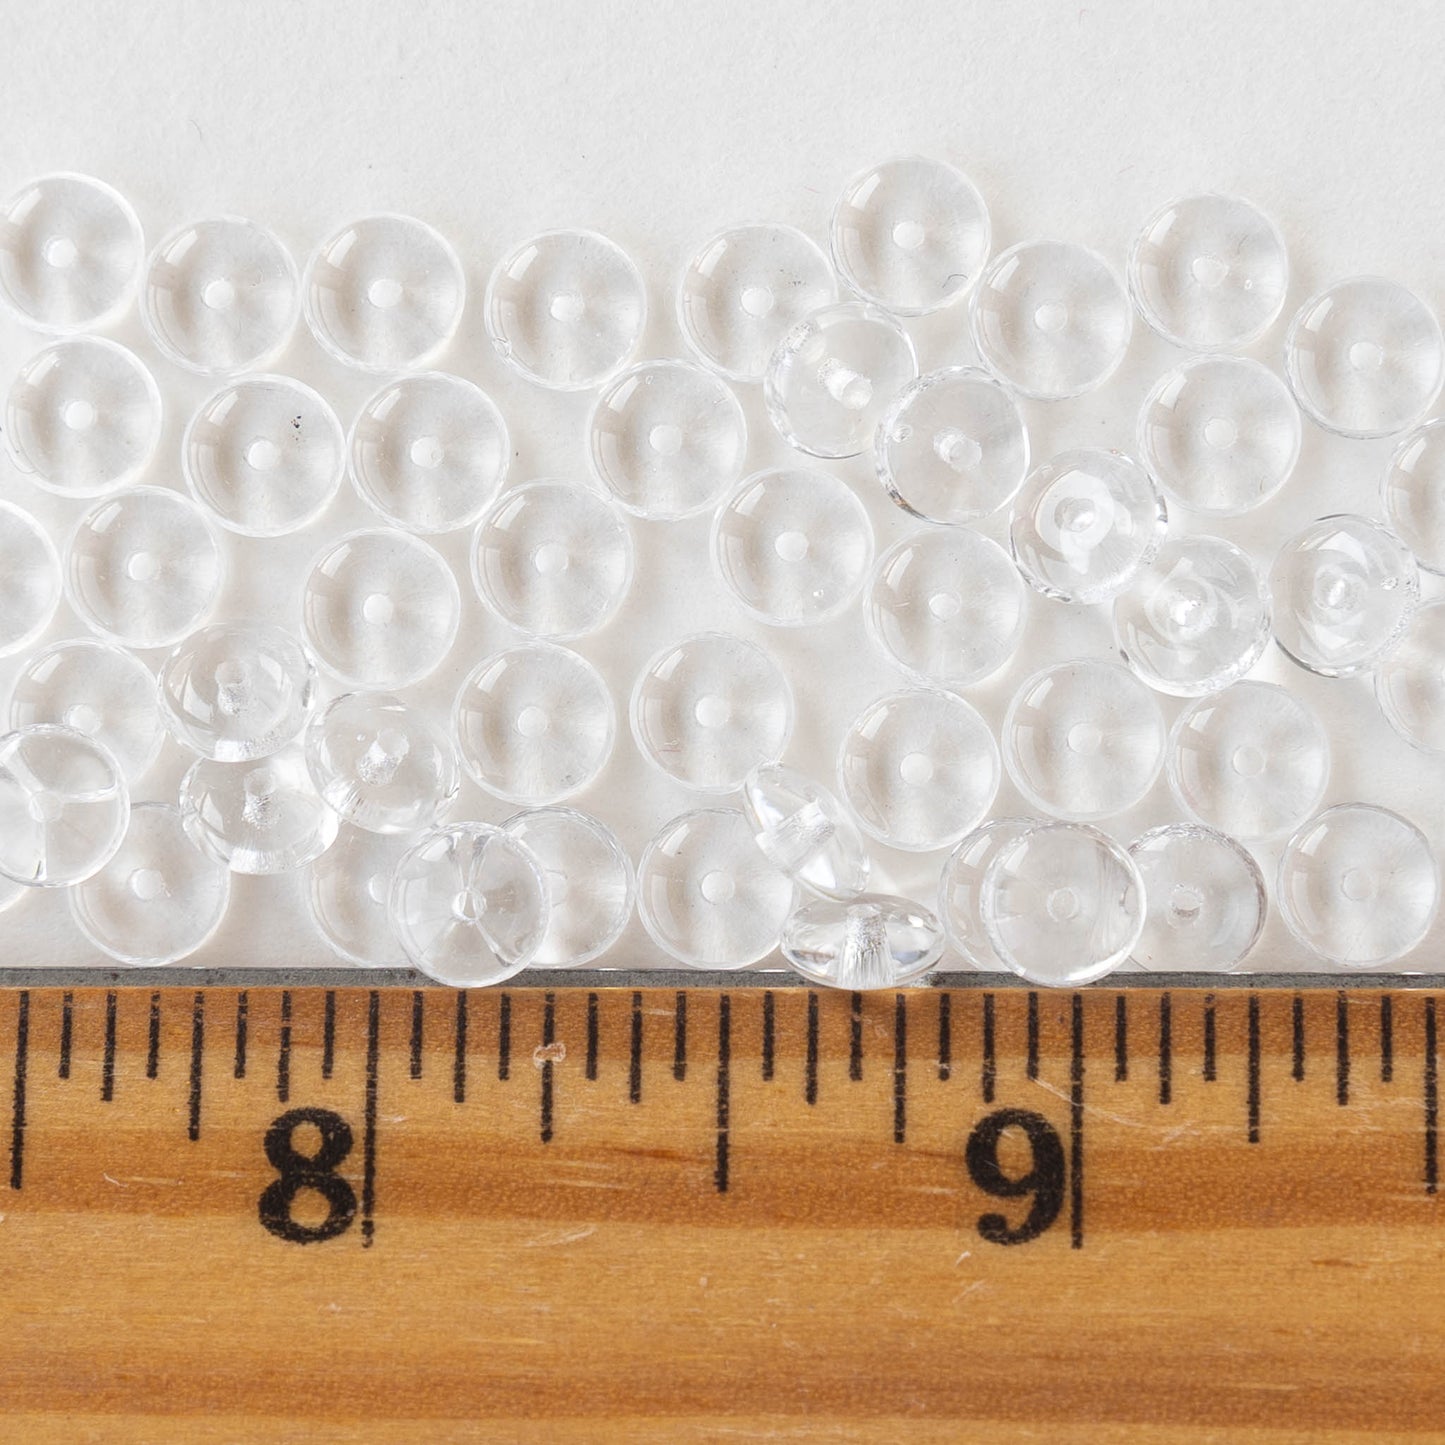 6mm Rondelle Beads - Crystal - 100 Beads